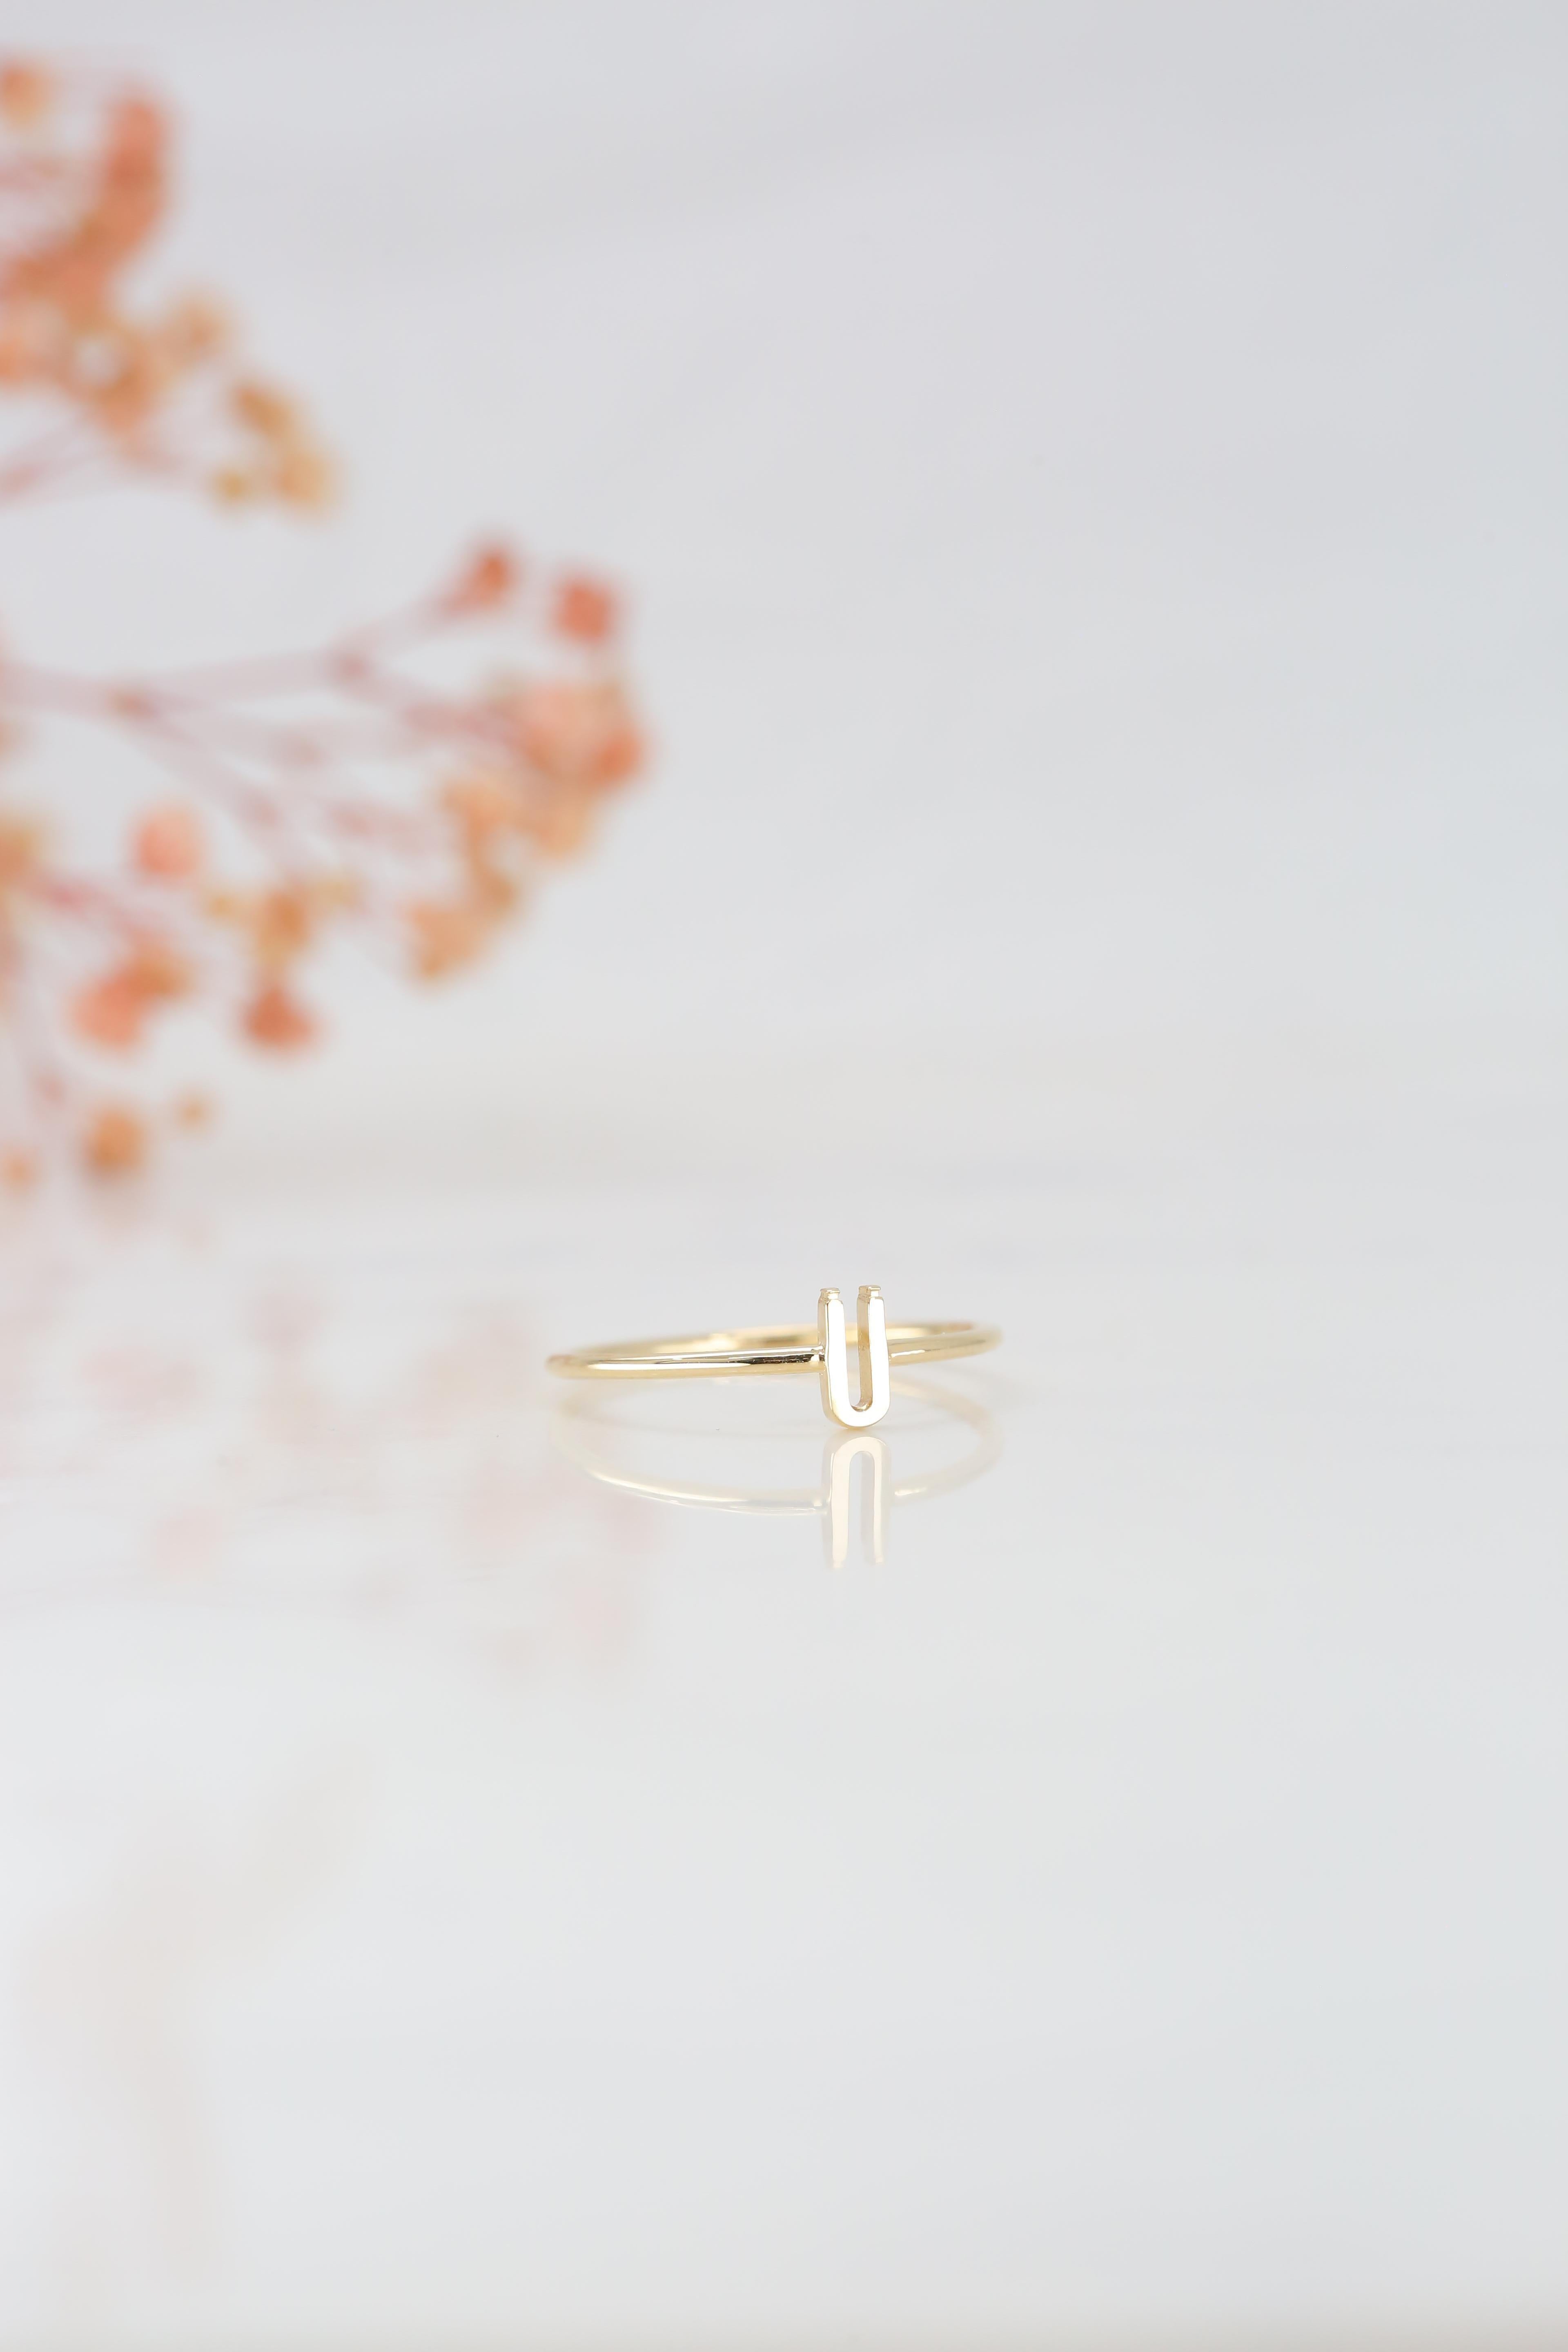 For Sale:  14K Gold Initial Ü Letter Ring, Personalized Initial Letter Ring 7